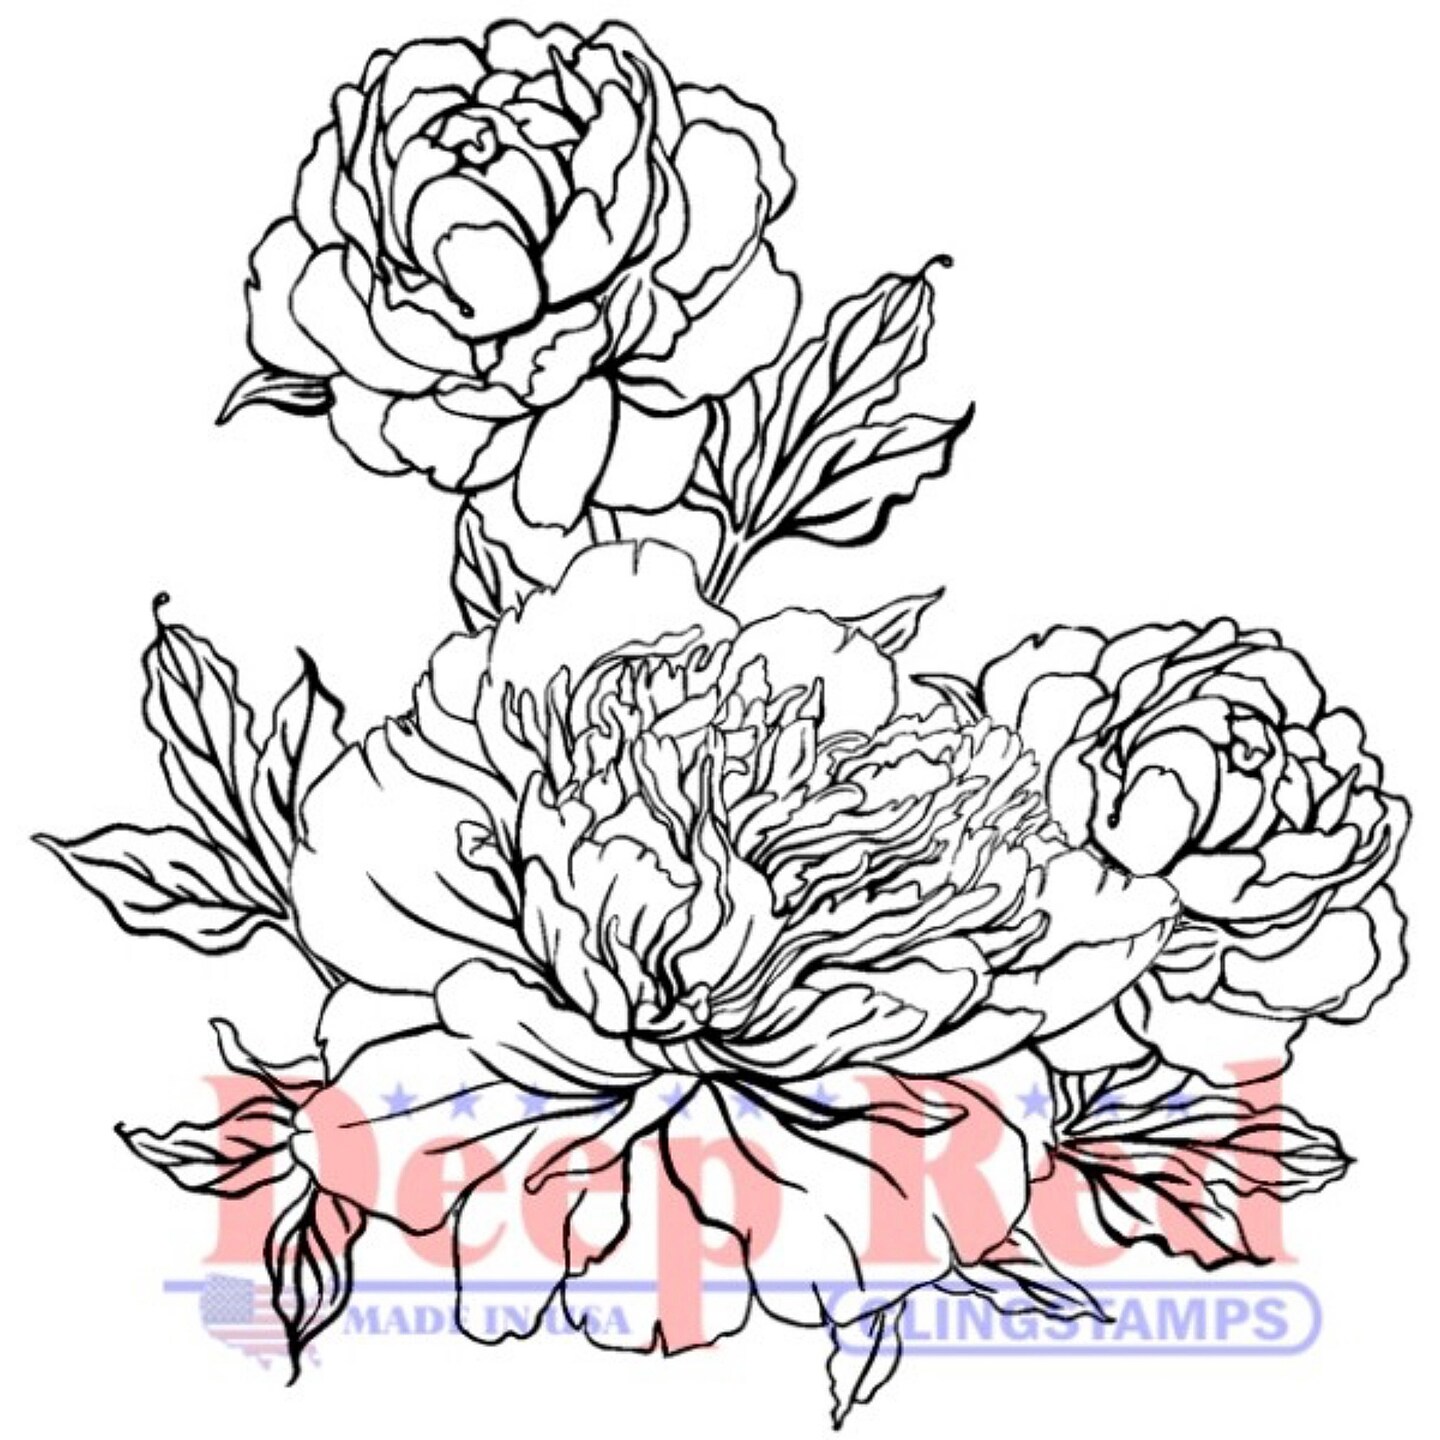 Deep Red Stamps Carnation Blooms Rubber Cling Stamp 2 x 2 inches